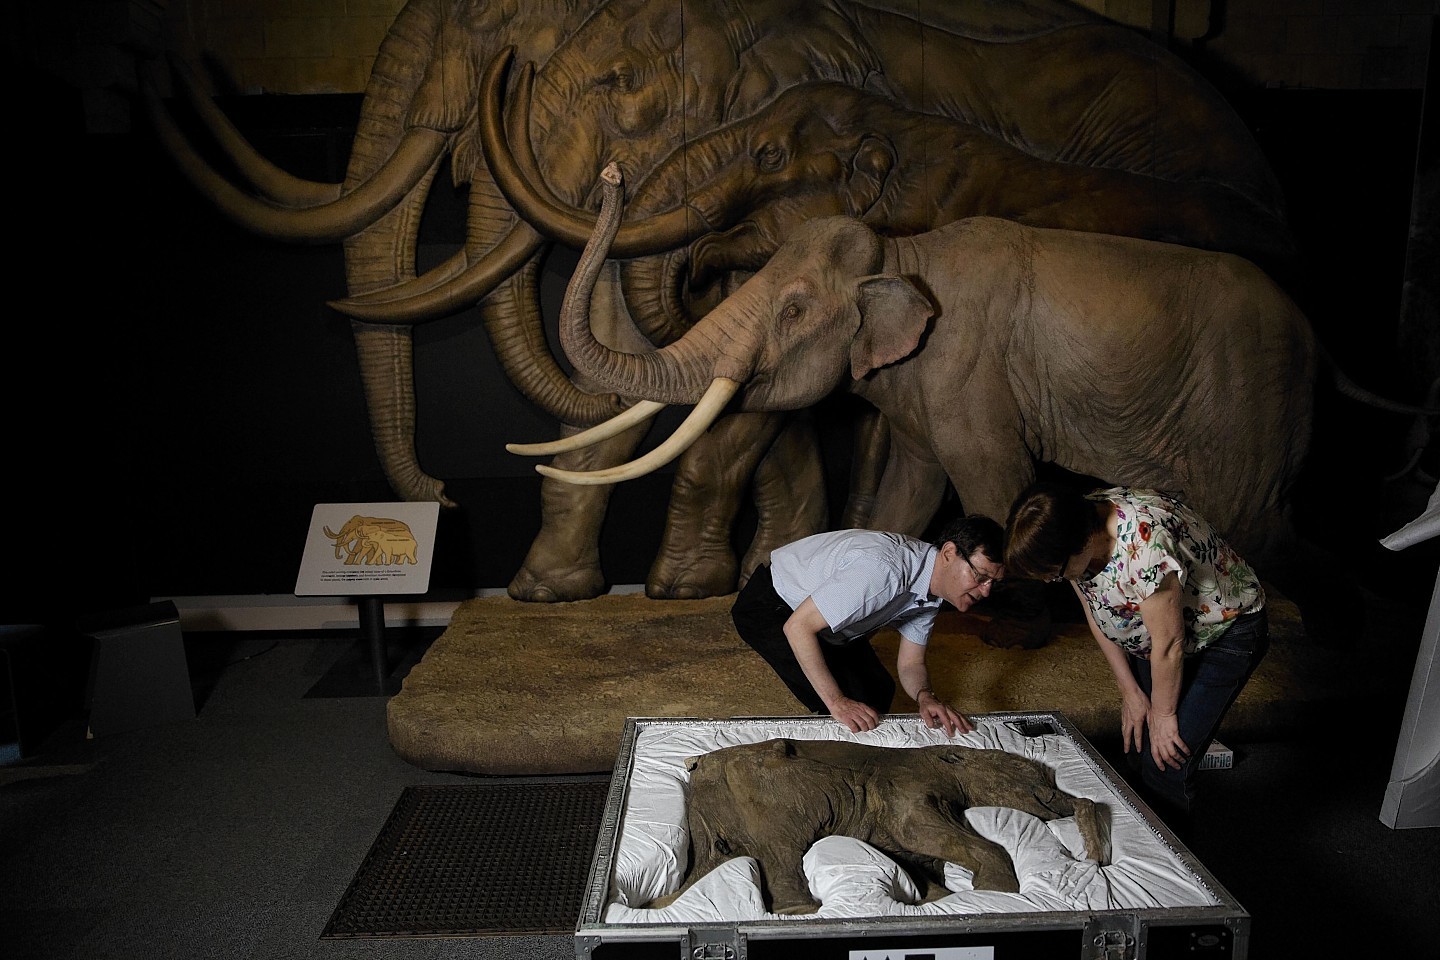 Mammoth researcher Professor Adrian Lister, left, and curator of the Shemanovsky Museum Galina Karzanova pose for members of the media looking at Lyuba, a baby woolly mammoth considered to be the most complete example of the species ever found, at the Natural History Museum in London